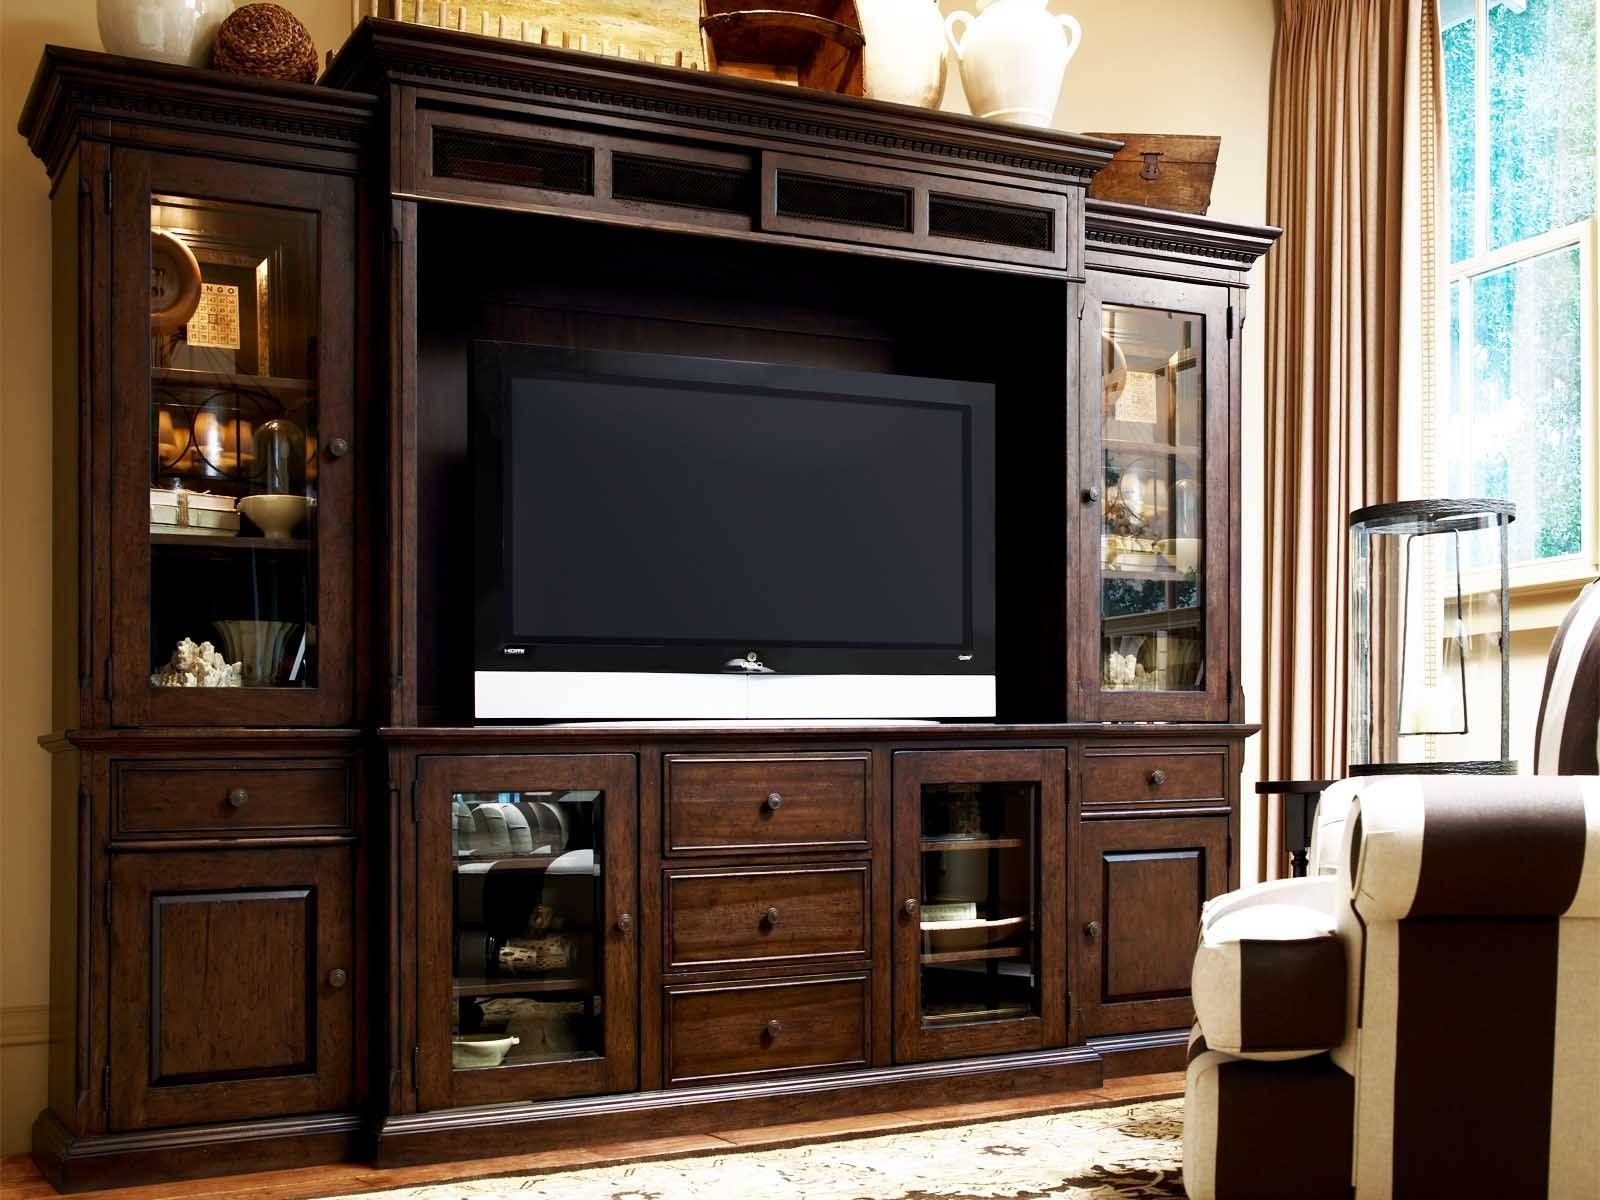 Tv Stand With Hutch Be Equipped Cabinet Drawer Made Of Wood For Pertaining To Tv Hutch Cabinets (View 3 of 15)